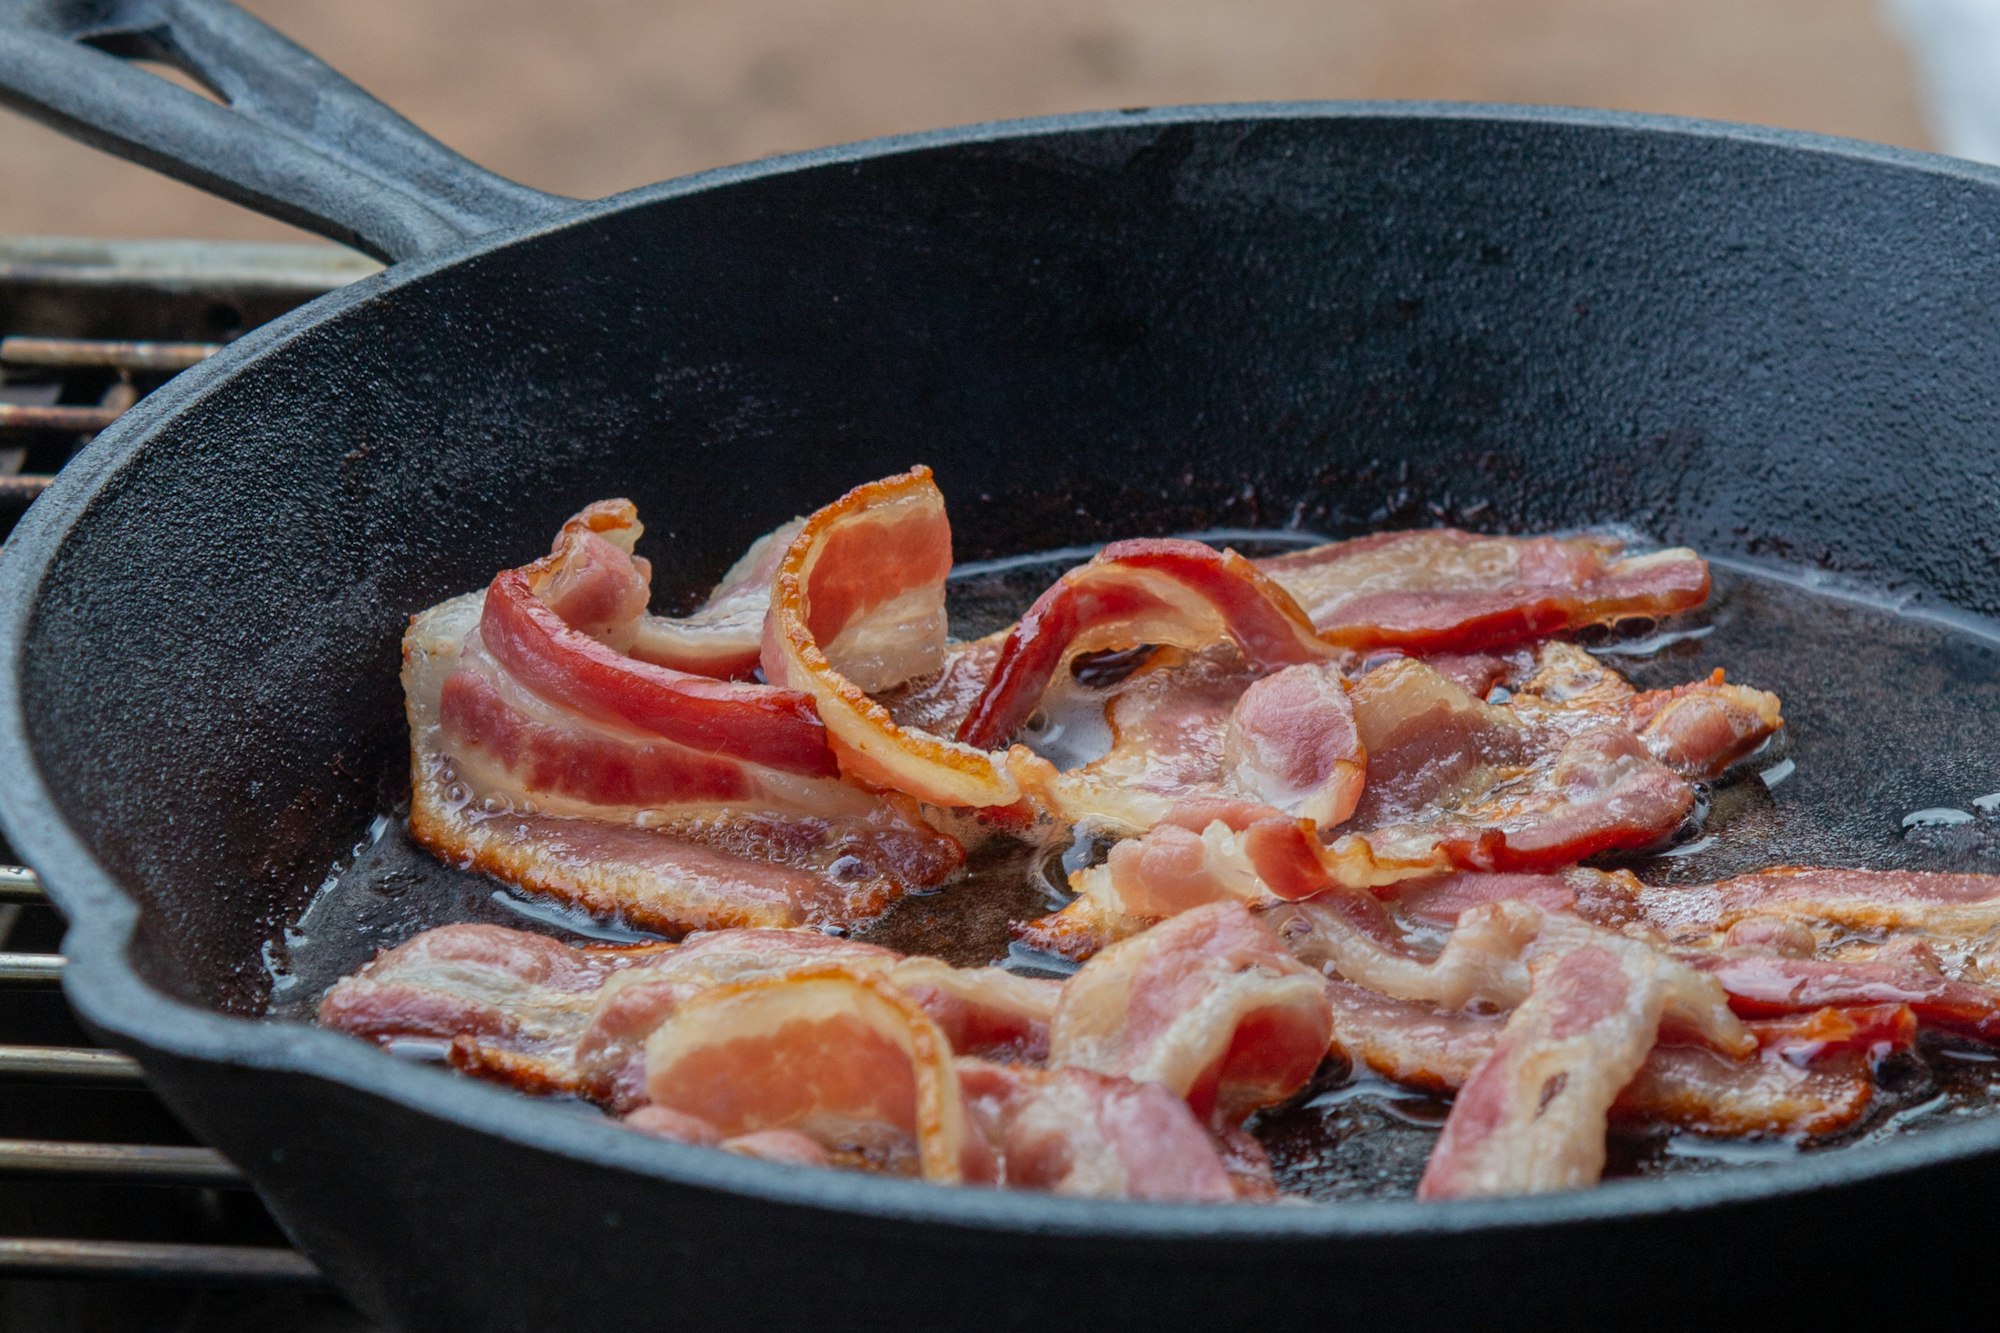 Camp grilled bacon, grill, fat, bacon, grease, cast iron skillet, skillet, texas, state park, breakfast, gas grill, colorado bend state park